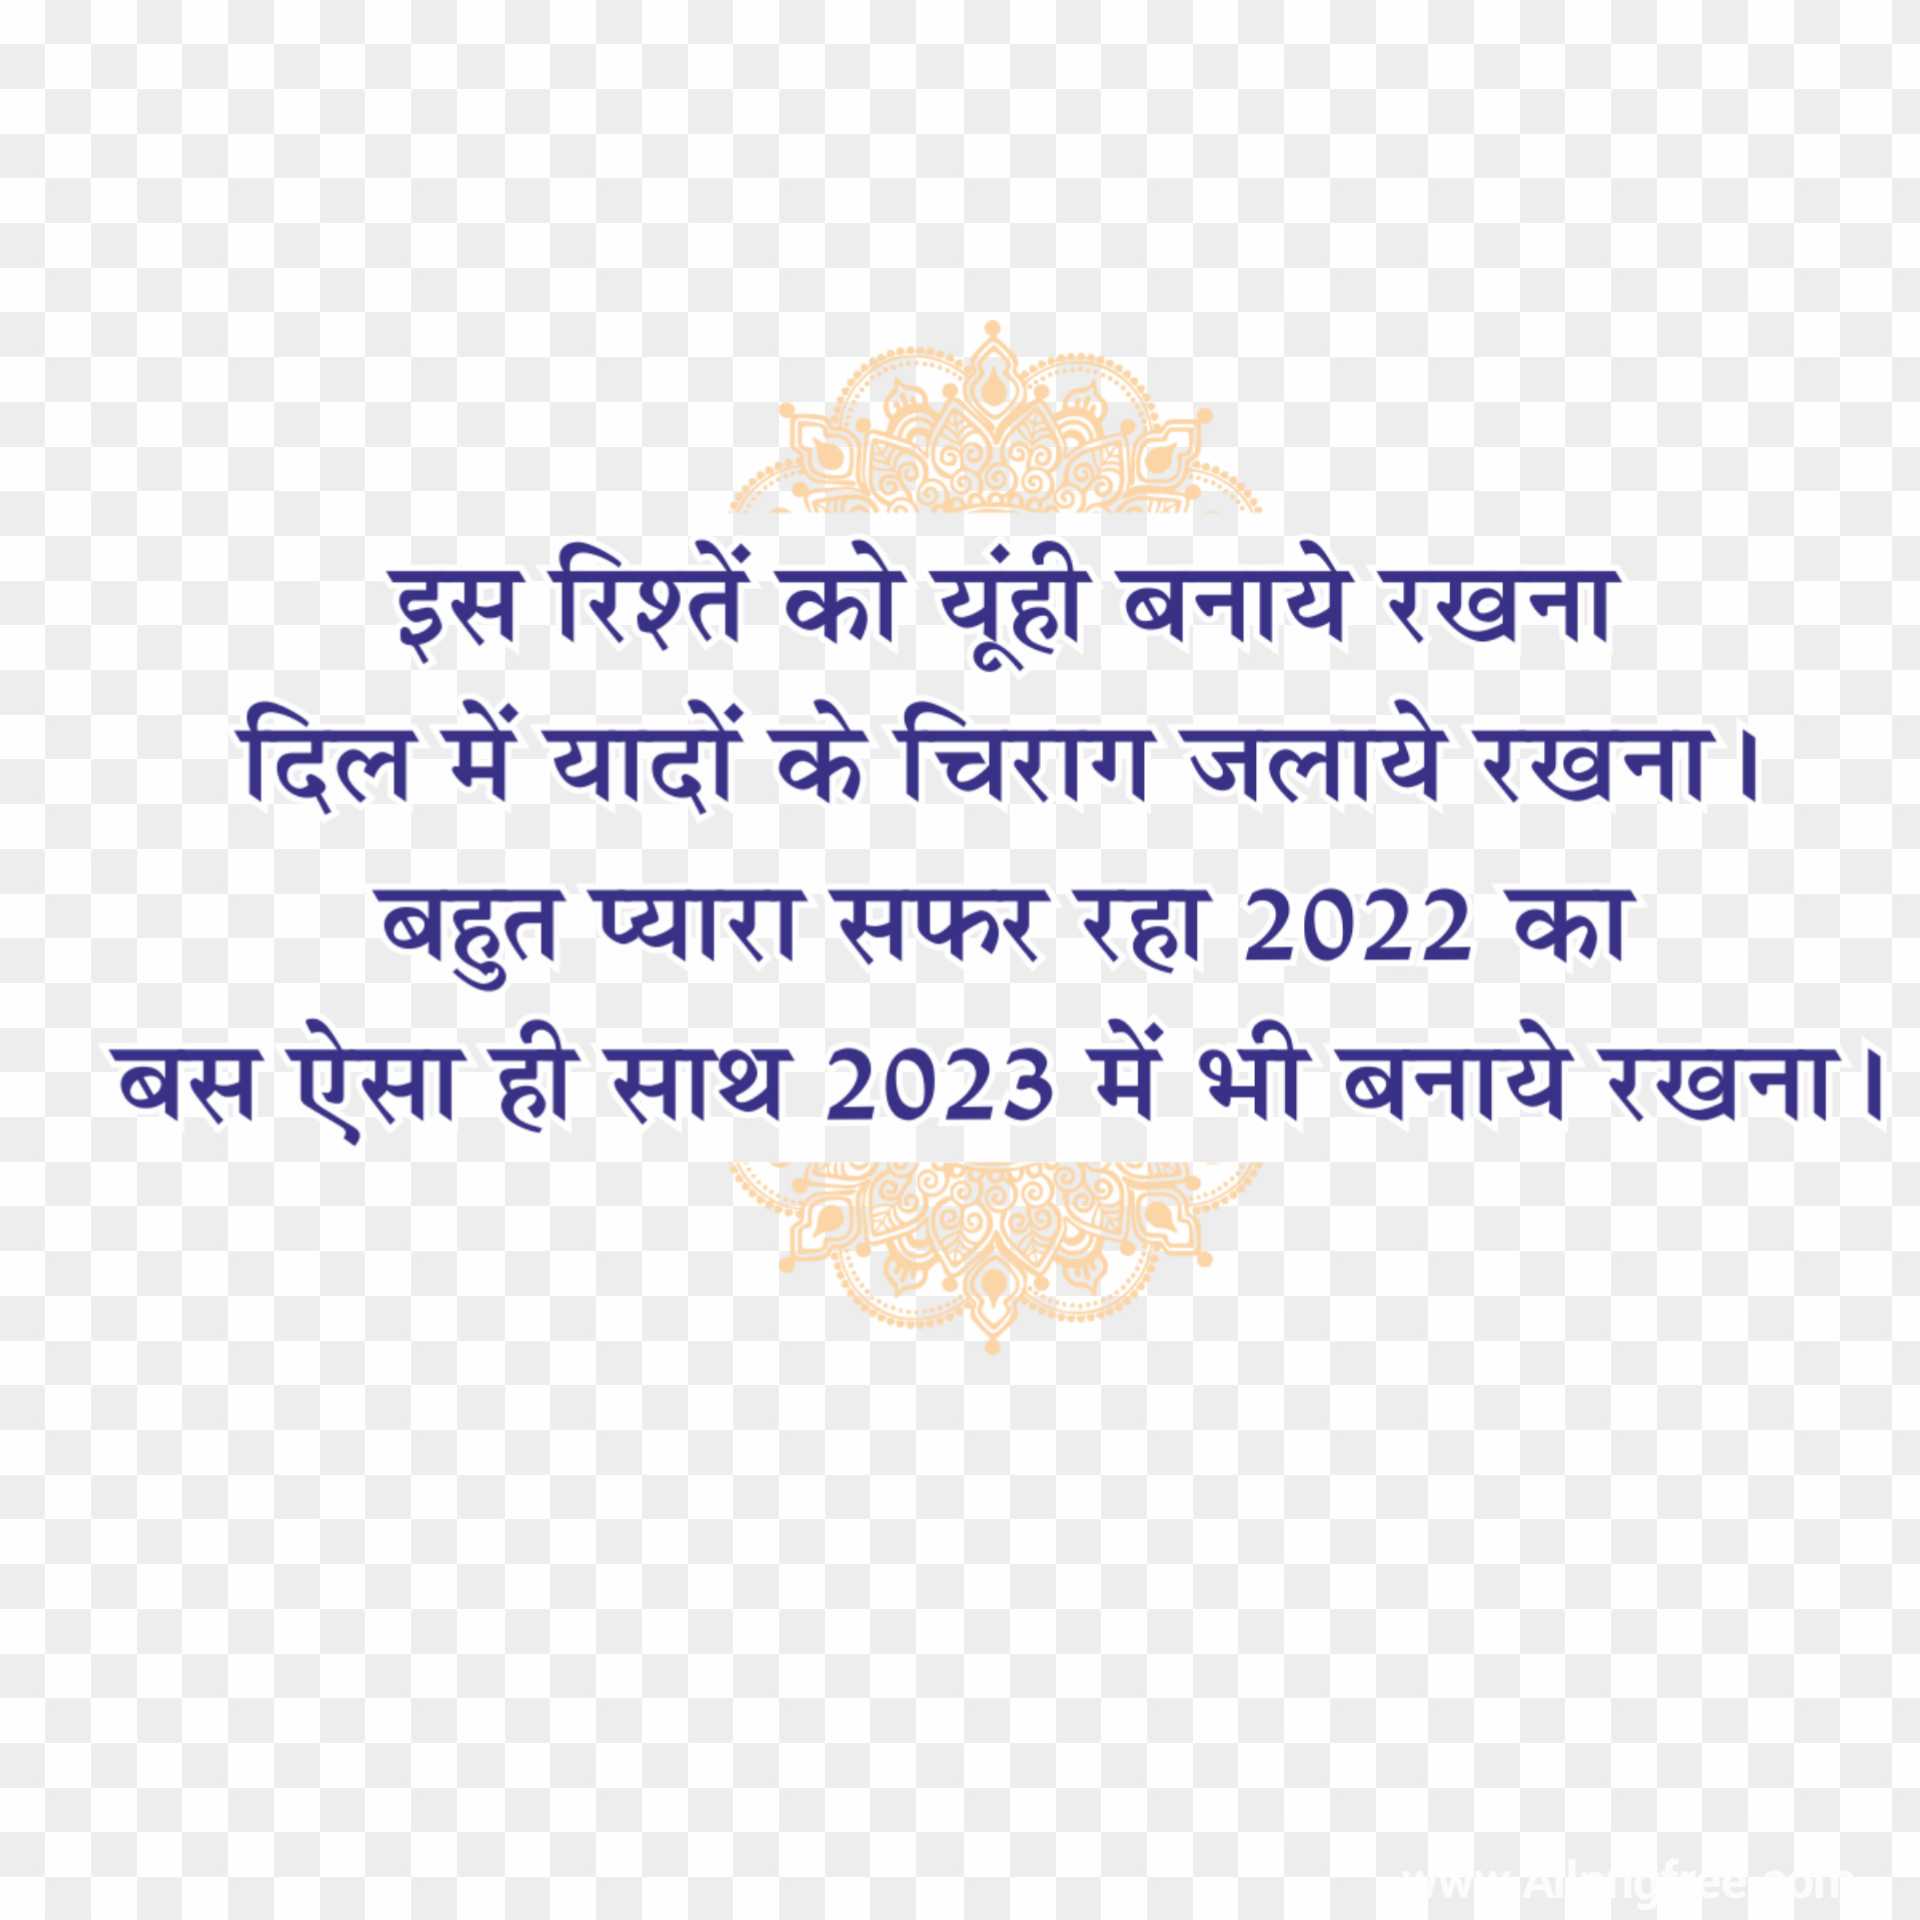 New year 2023 quotes in Hindi text PNG images